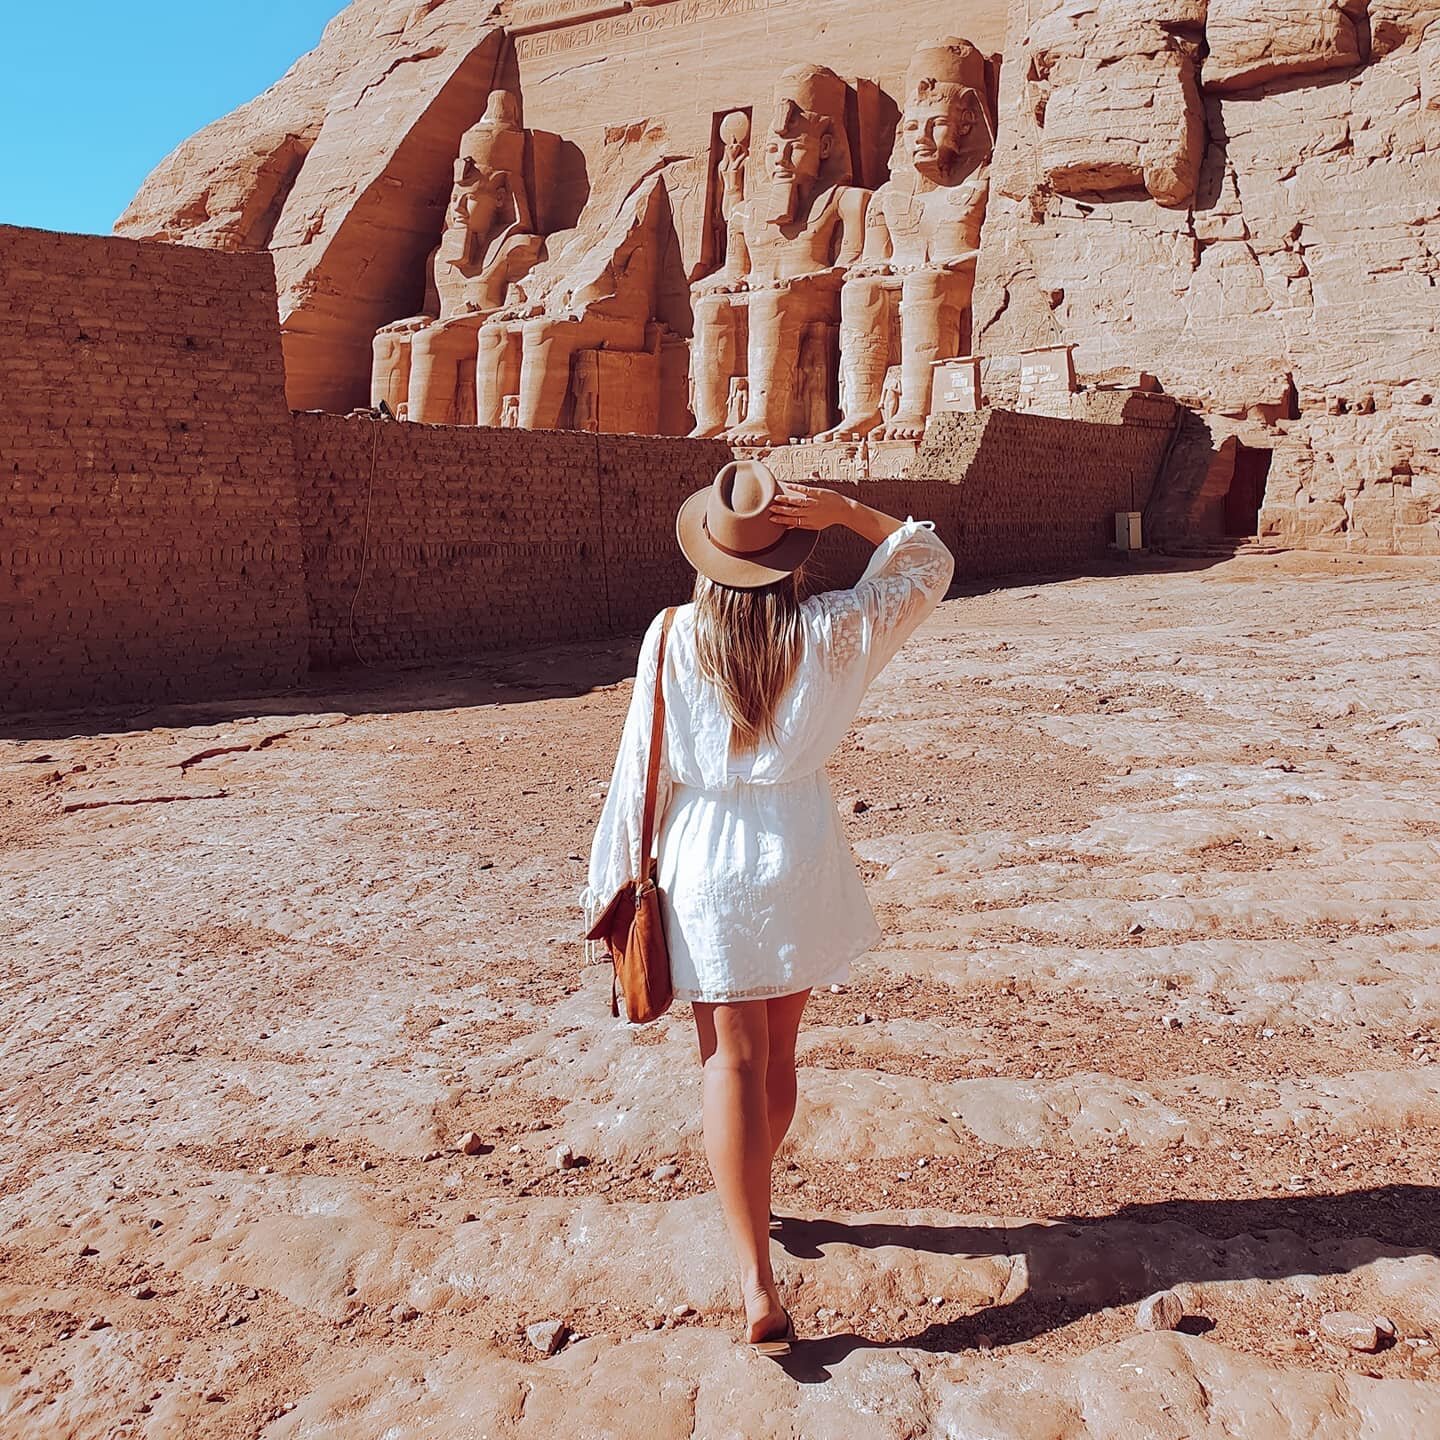 𝙁𝙐𝙉 𝙁𝘼𝘾𝙏: For over six years, I scribed for some of the biggest names in the travel industry. From the bustling souks of Morocco to the snow-capped mountains of Austria, I was lucky enough to explore a gazillion fascinating places (many of whi